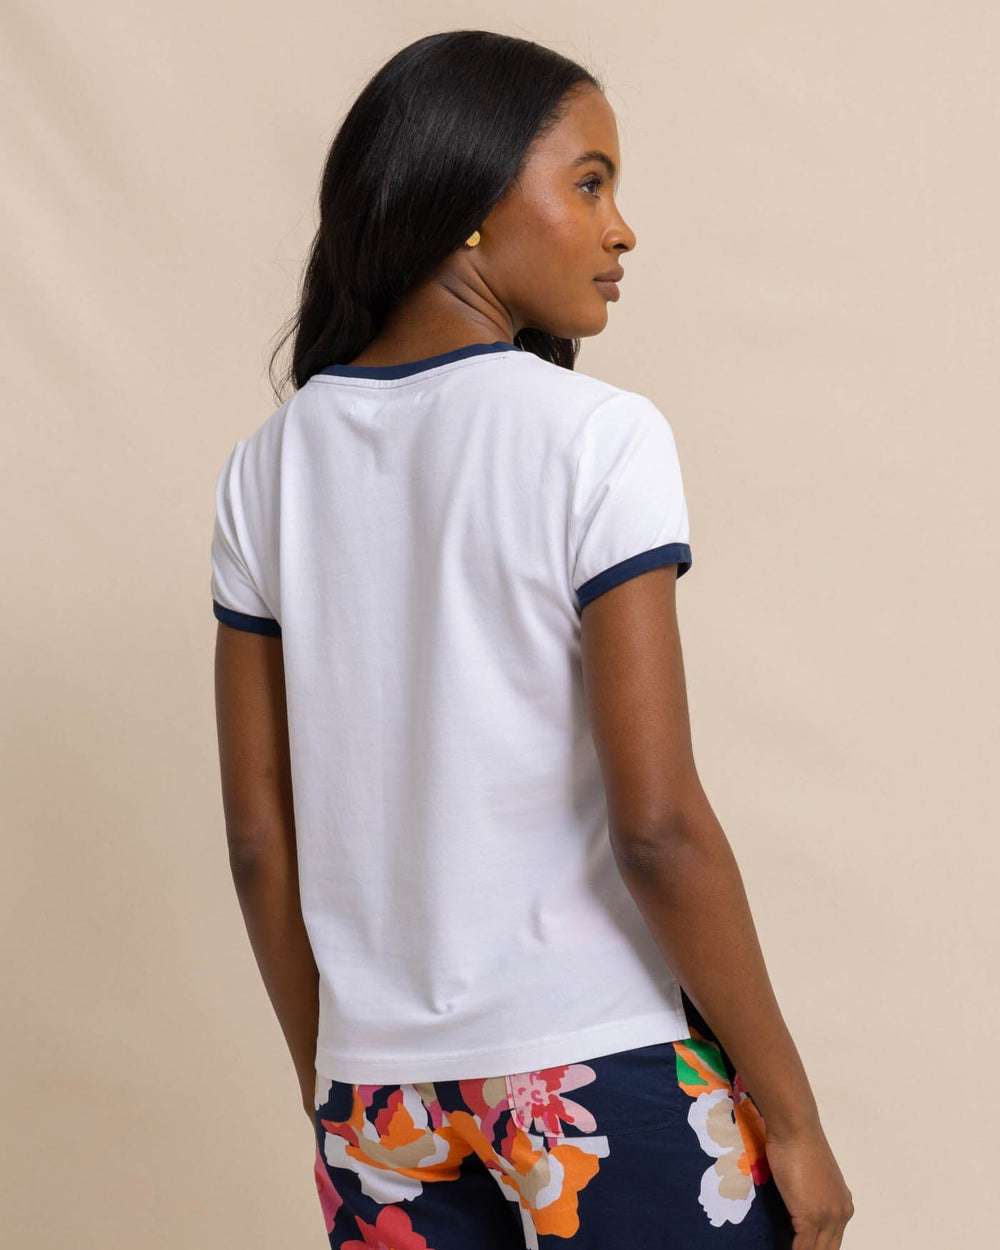 The back view of the Reece Baby Pique Top by Southern Tide - Classic White